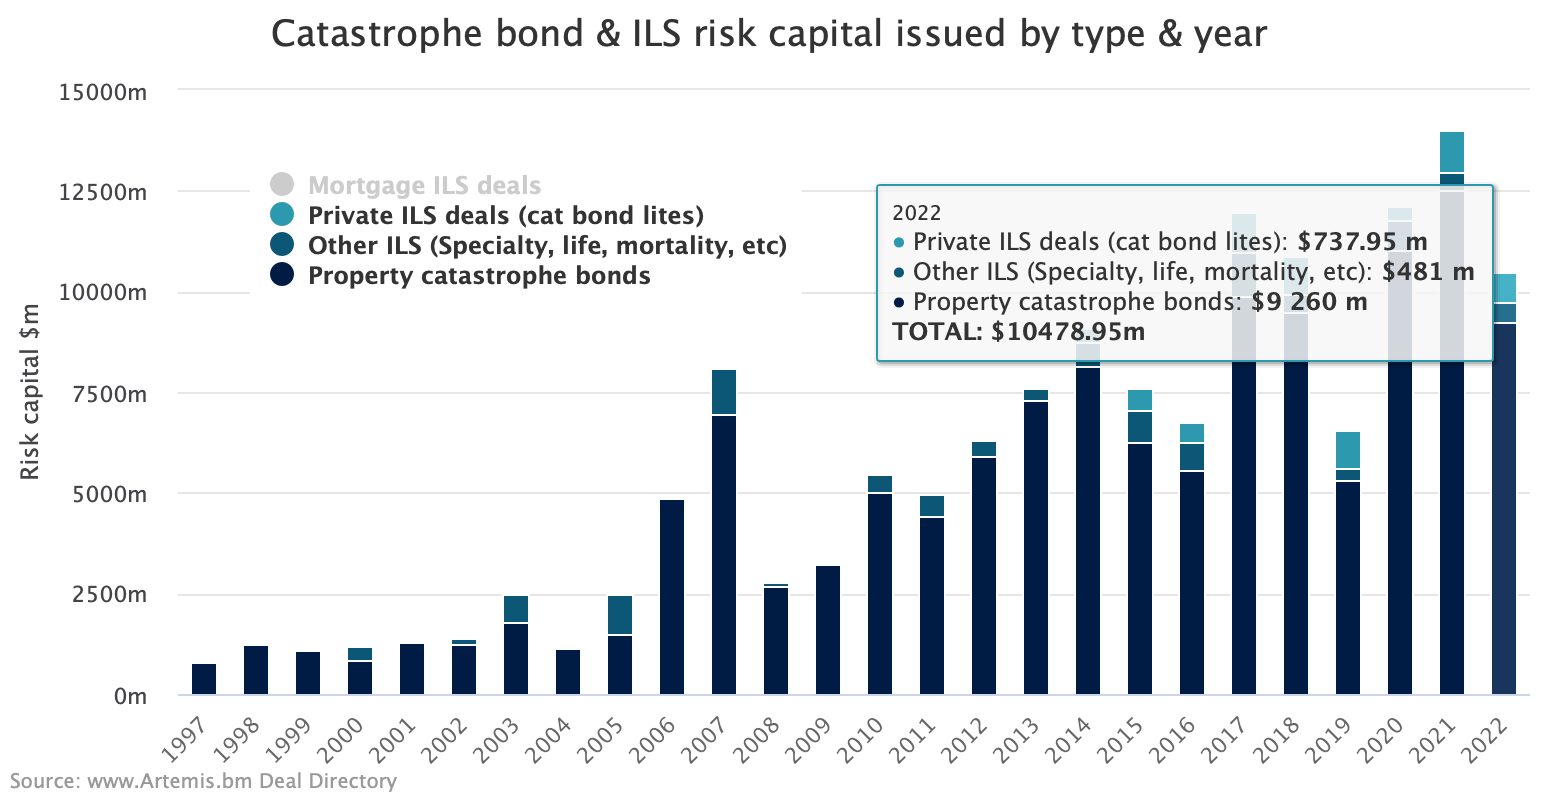 2022 catastrophe bond and ILS issuance